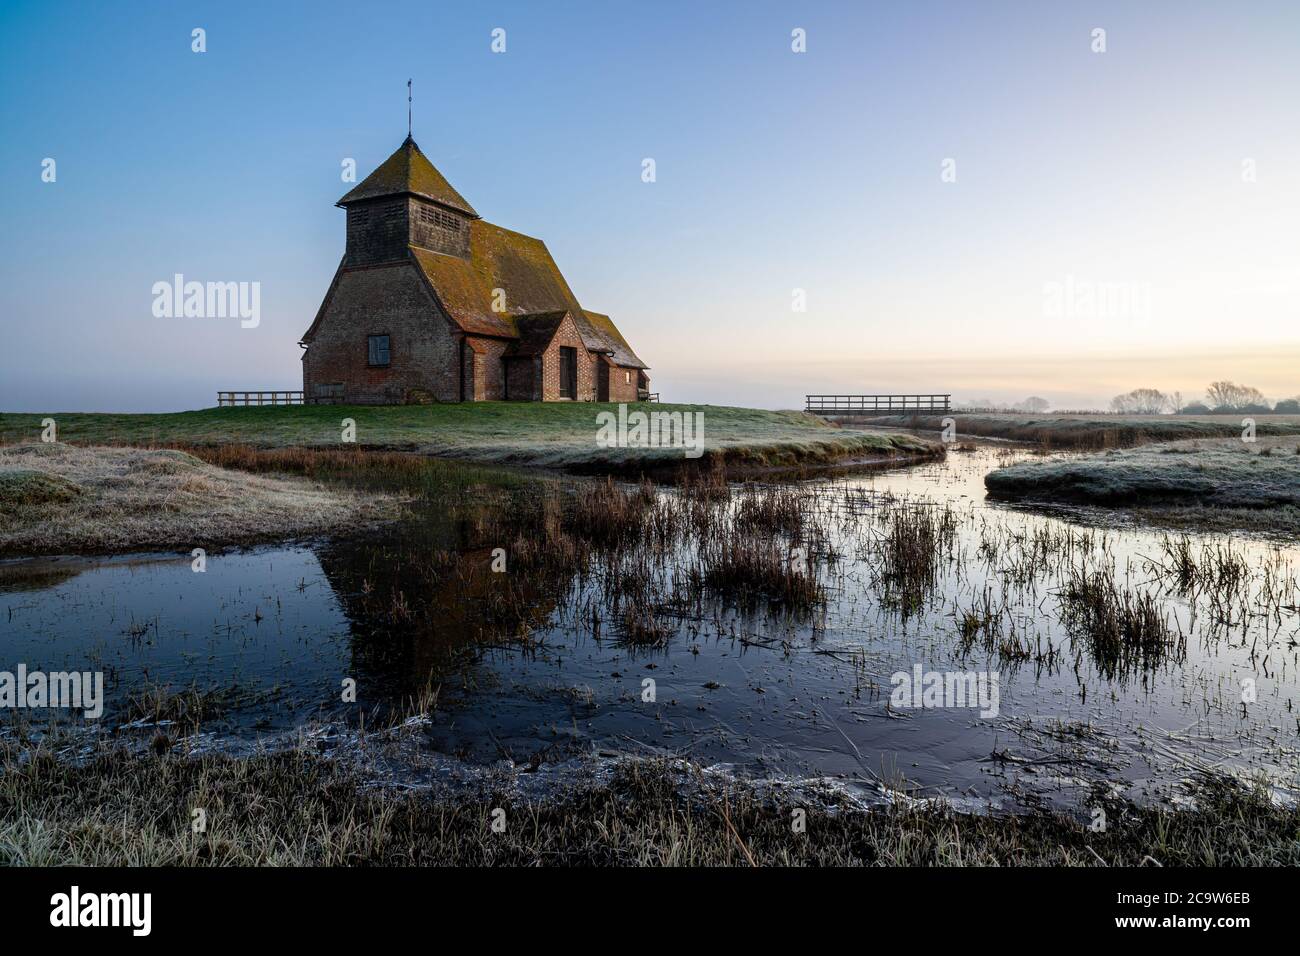 St Thomas à Becket Church in Fairfield at sunrise before the fog. Stock Photo